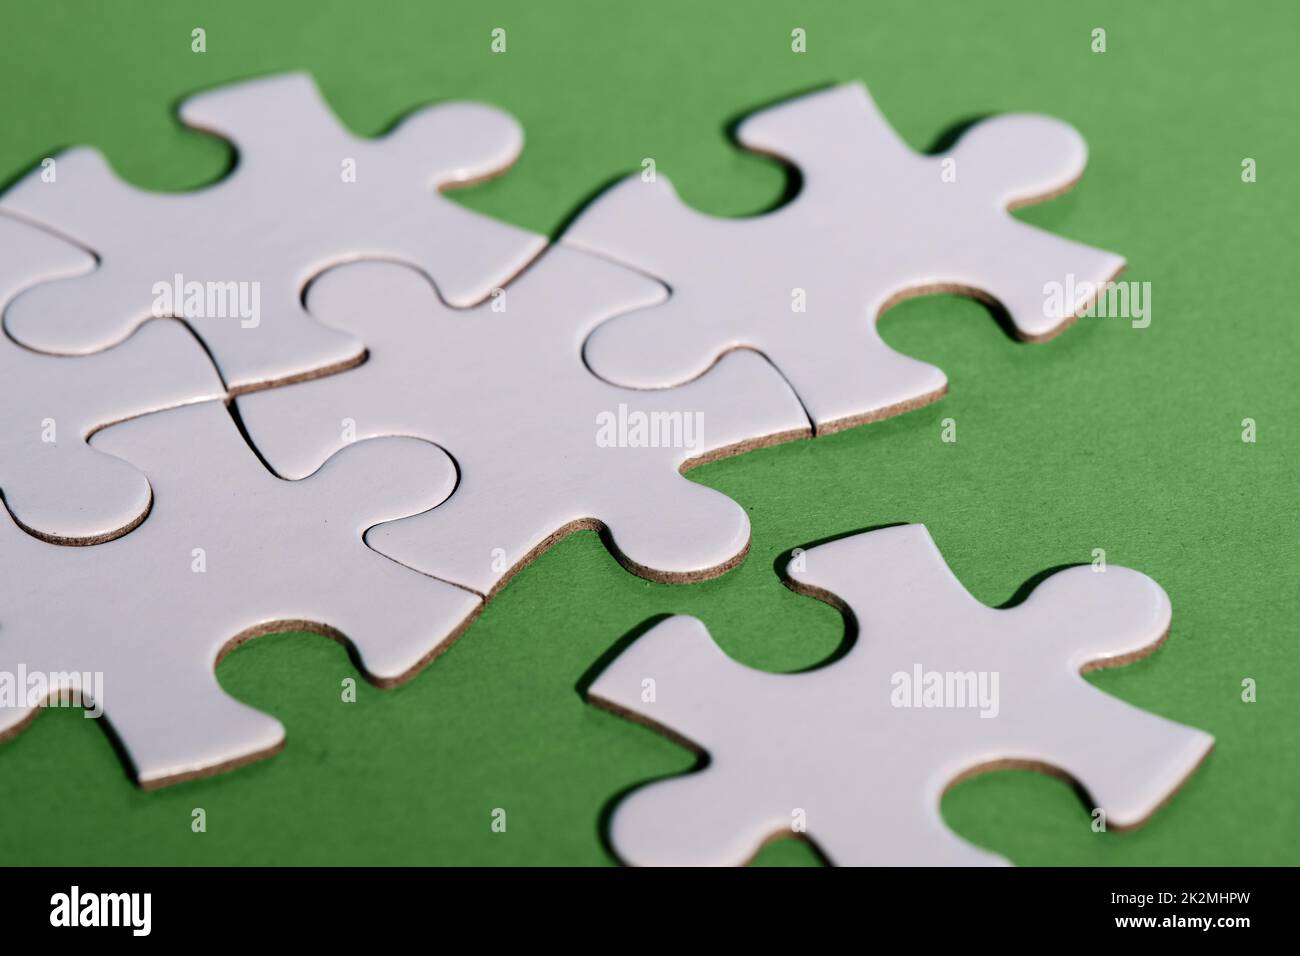 Close-up on jigsaw puzzle pieces, blank white paper jigsaw puzzle elements linked together and separate. Closeup shot on green paper. Stock Photo